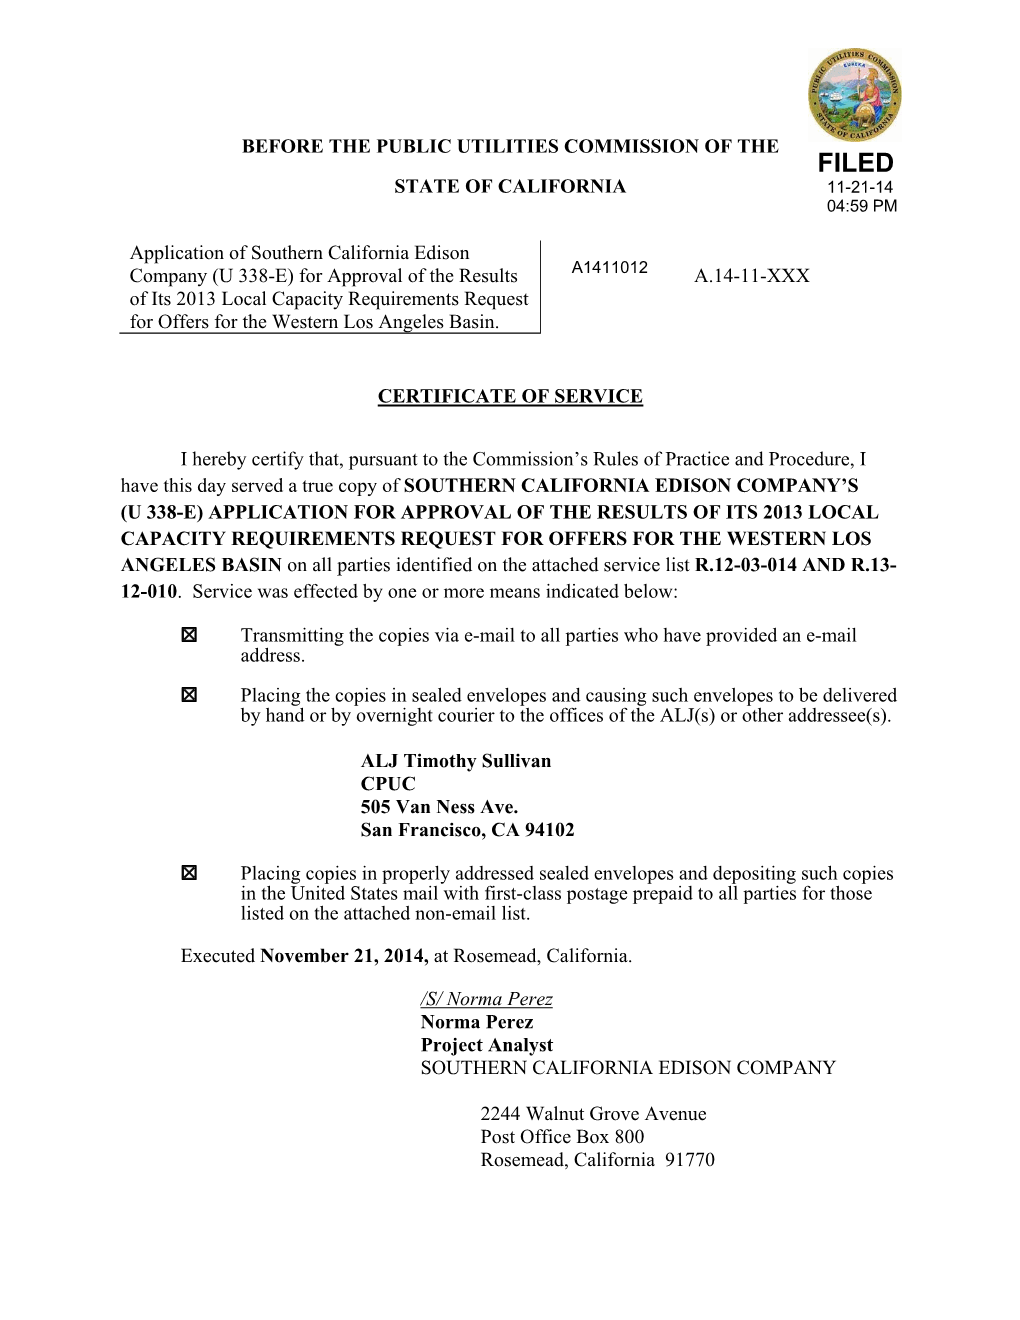 Before the Public Utilities Commission of the Filed State of California 11-21-14 04:59 Pm